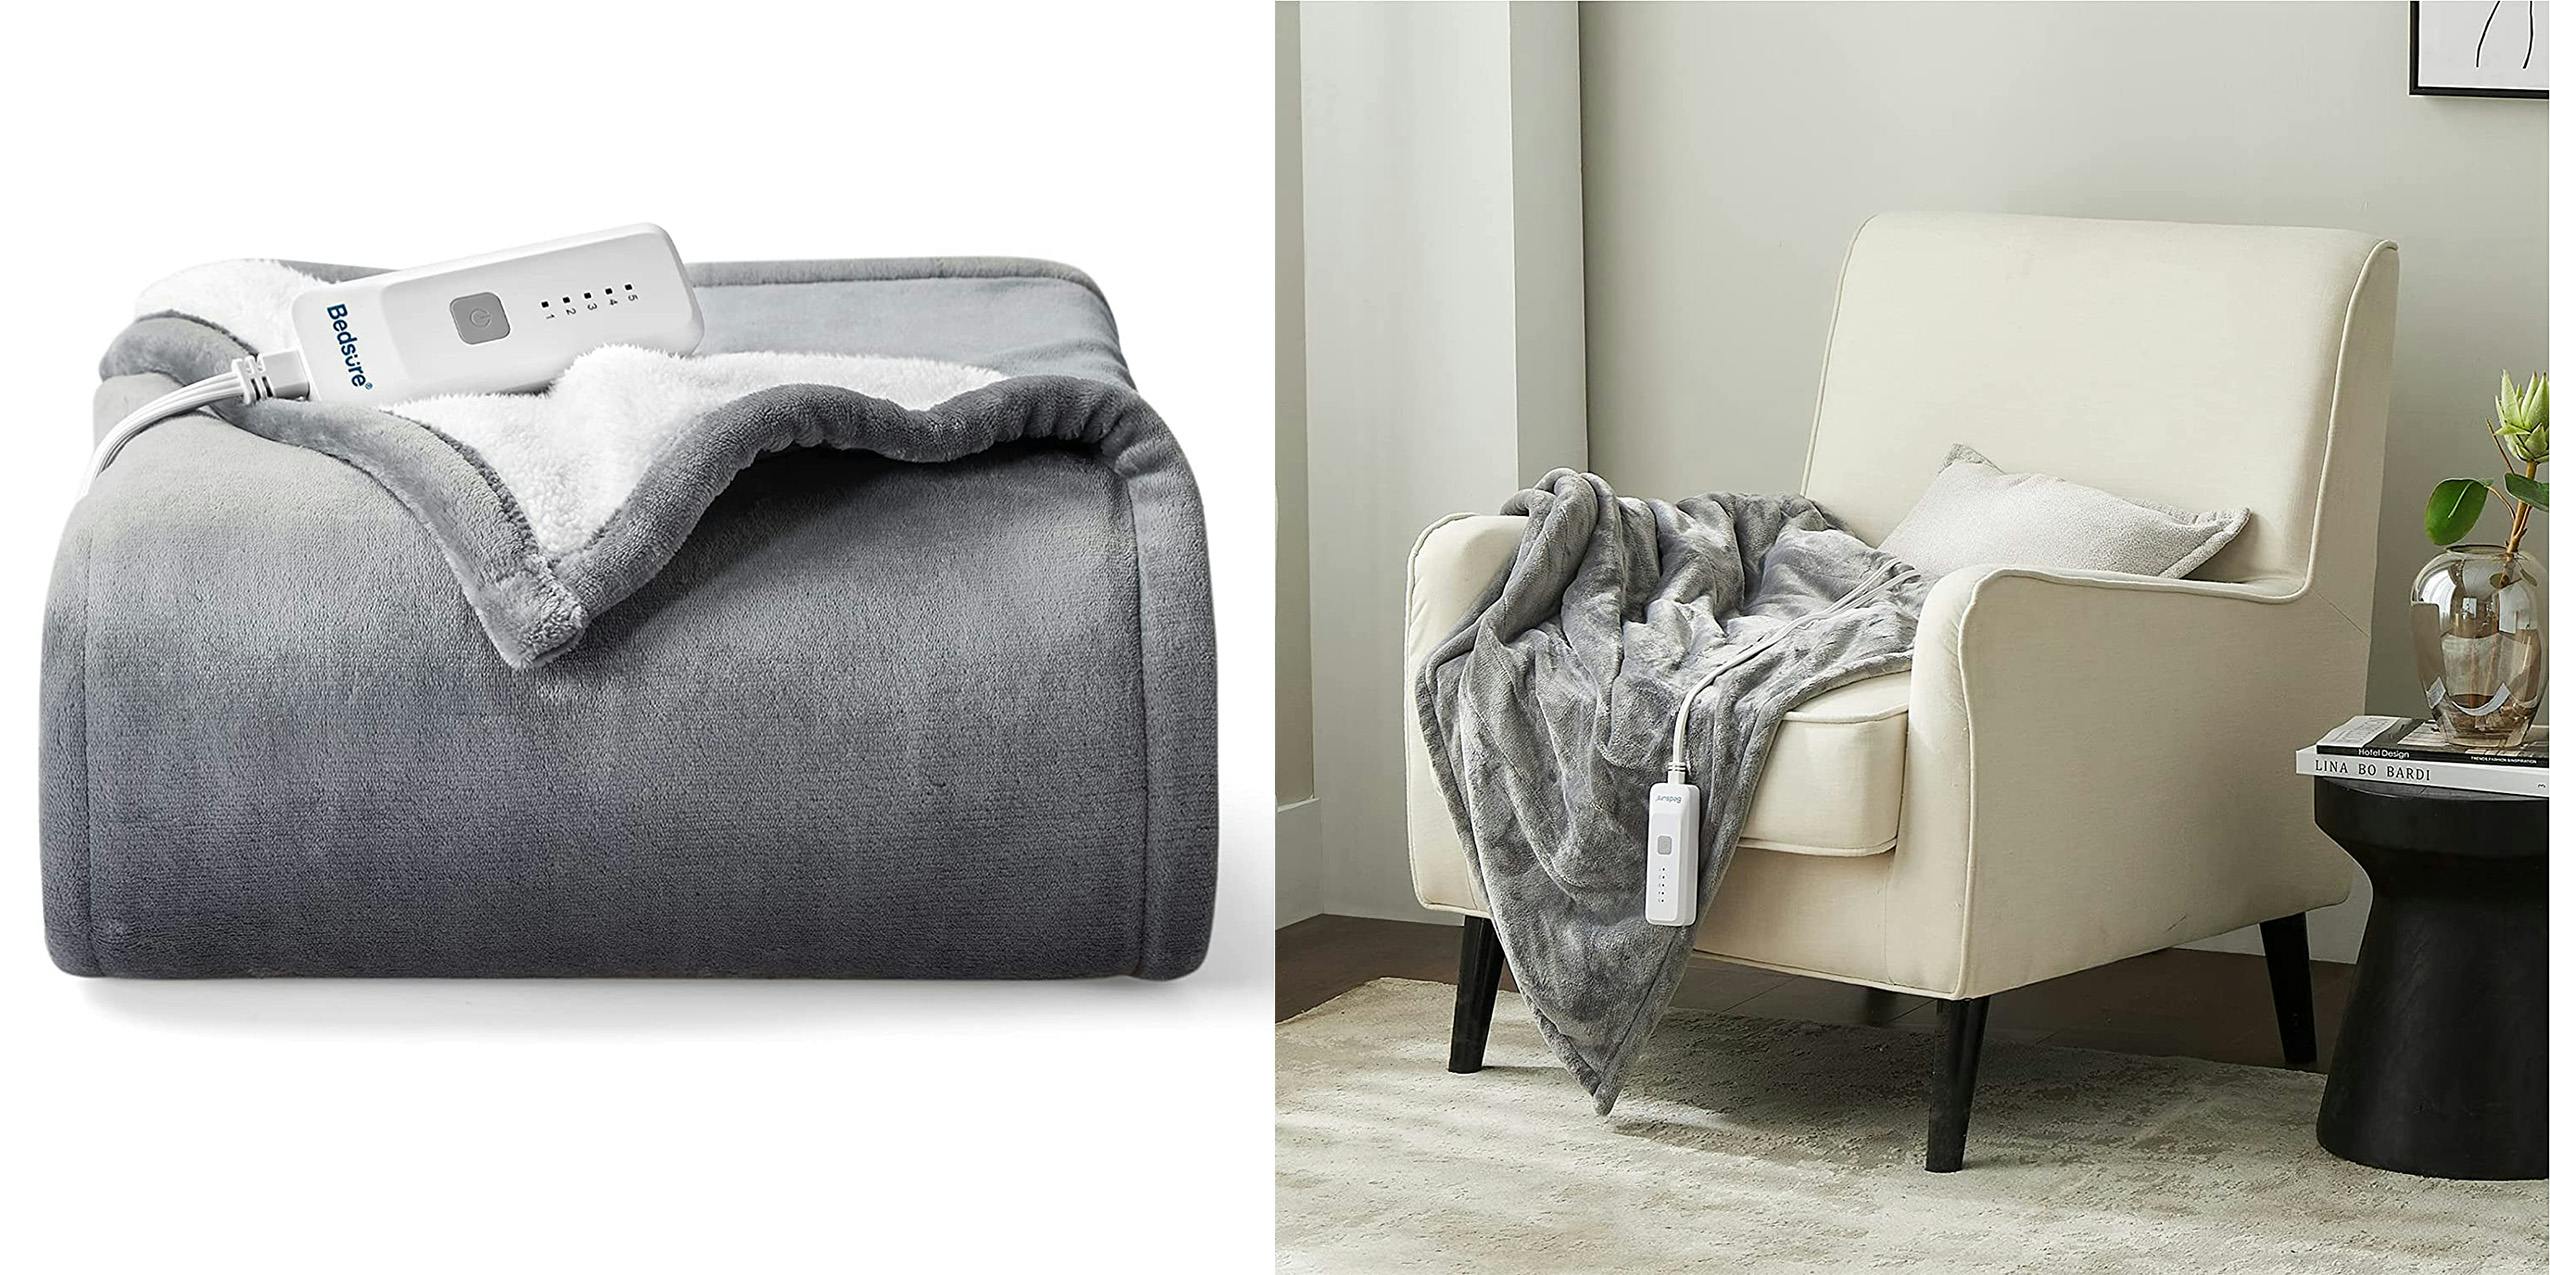 A Sherpa heated blanket draped over a piece of furniture, one of the coziest gift ideas for mom